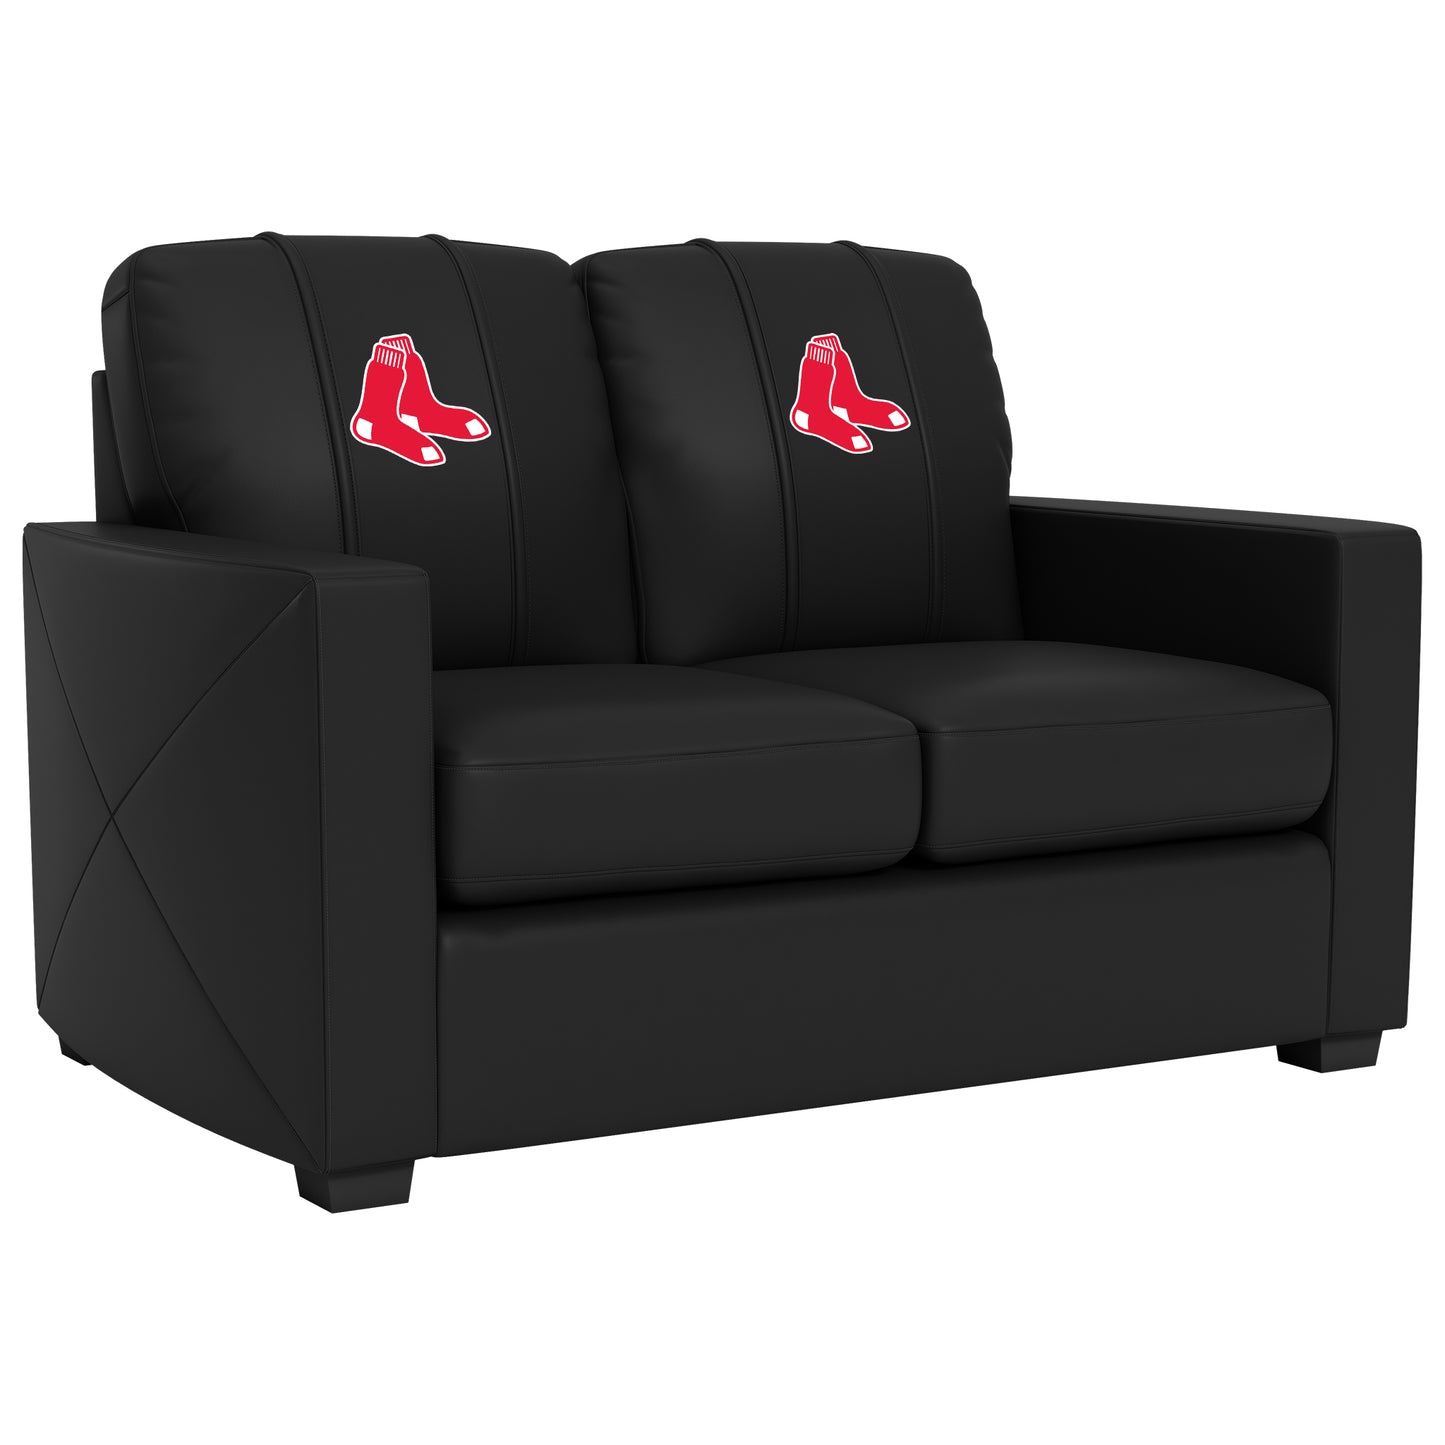 Silver Loveseat with Boston Red Sox Primary